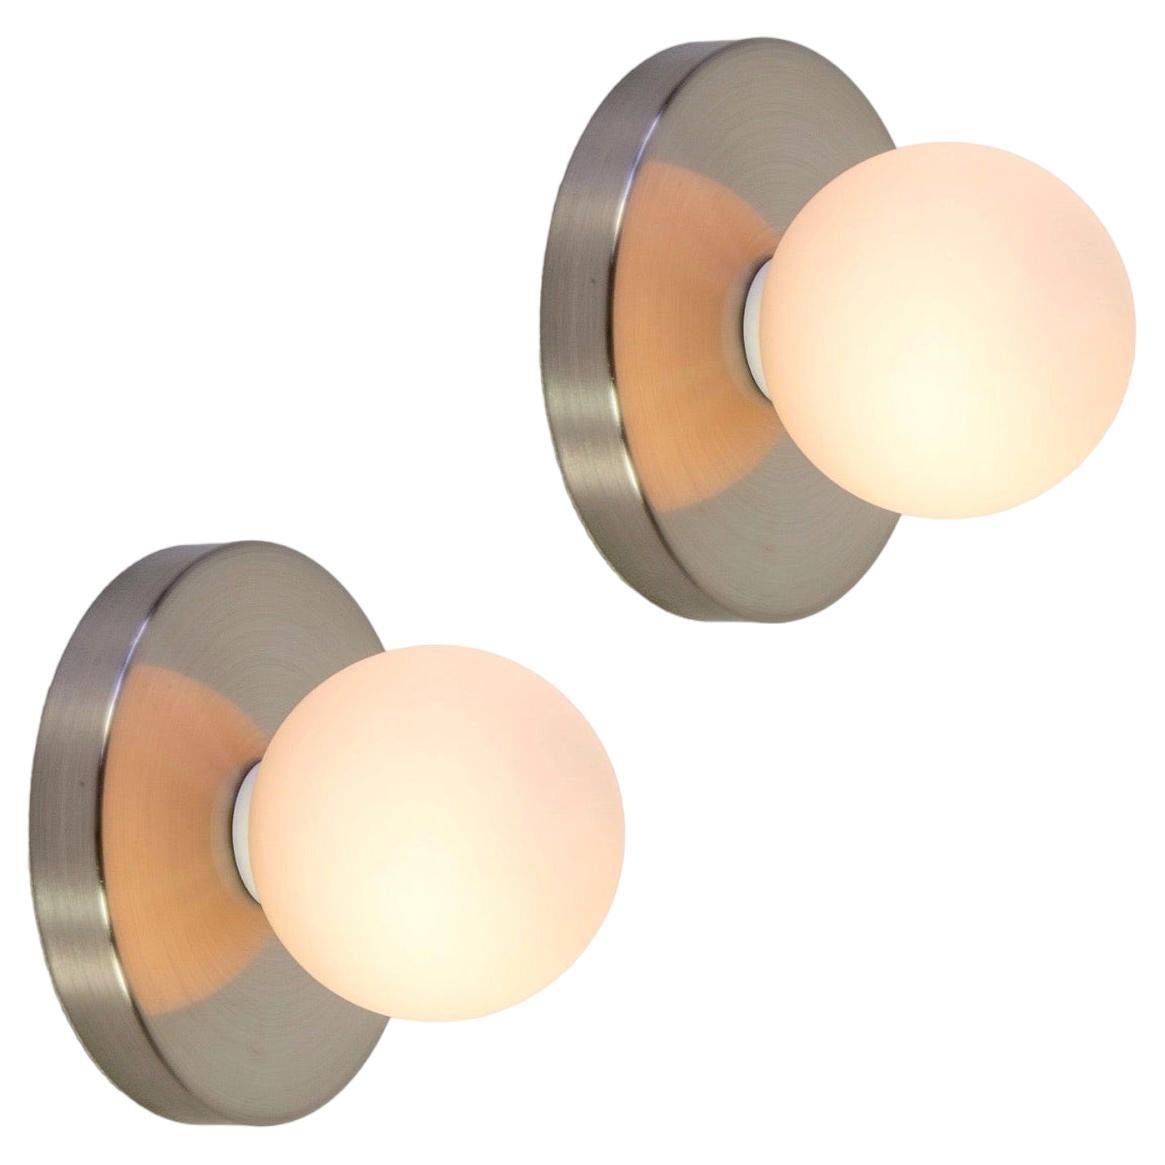 Pair of Globe Sconces by Research.Lighting, Brushed Nickel, Made to Order